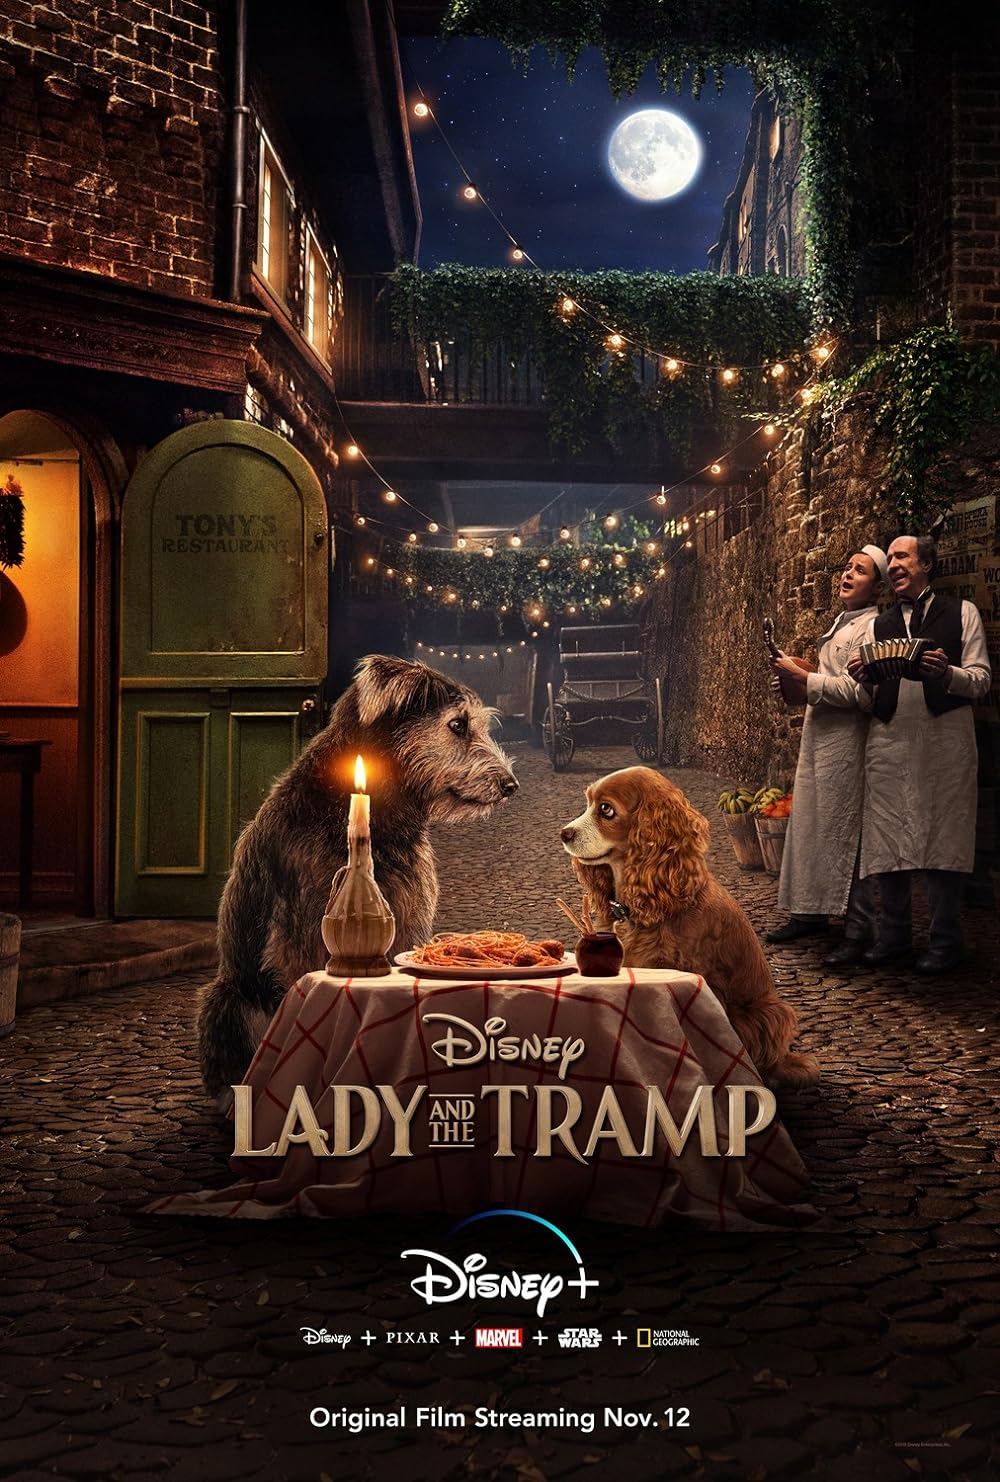 Best Christmas animated movies - Lady and the Tramp